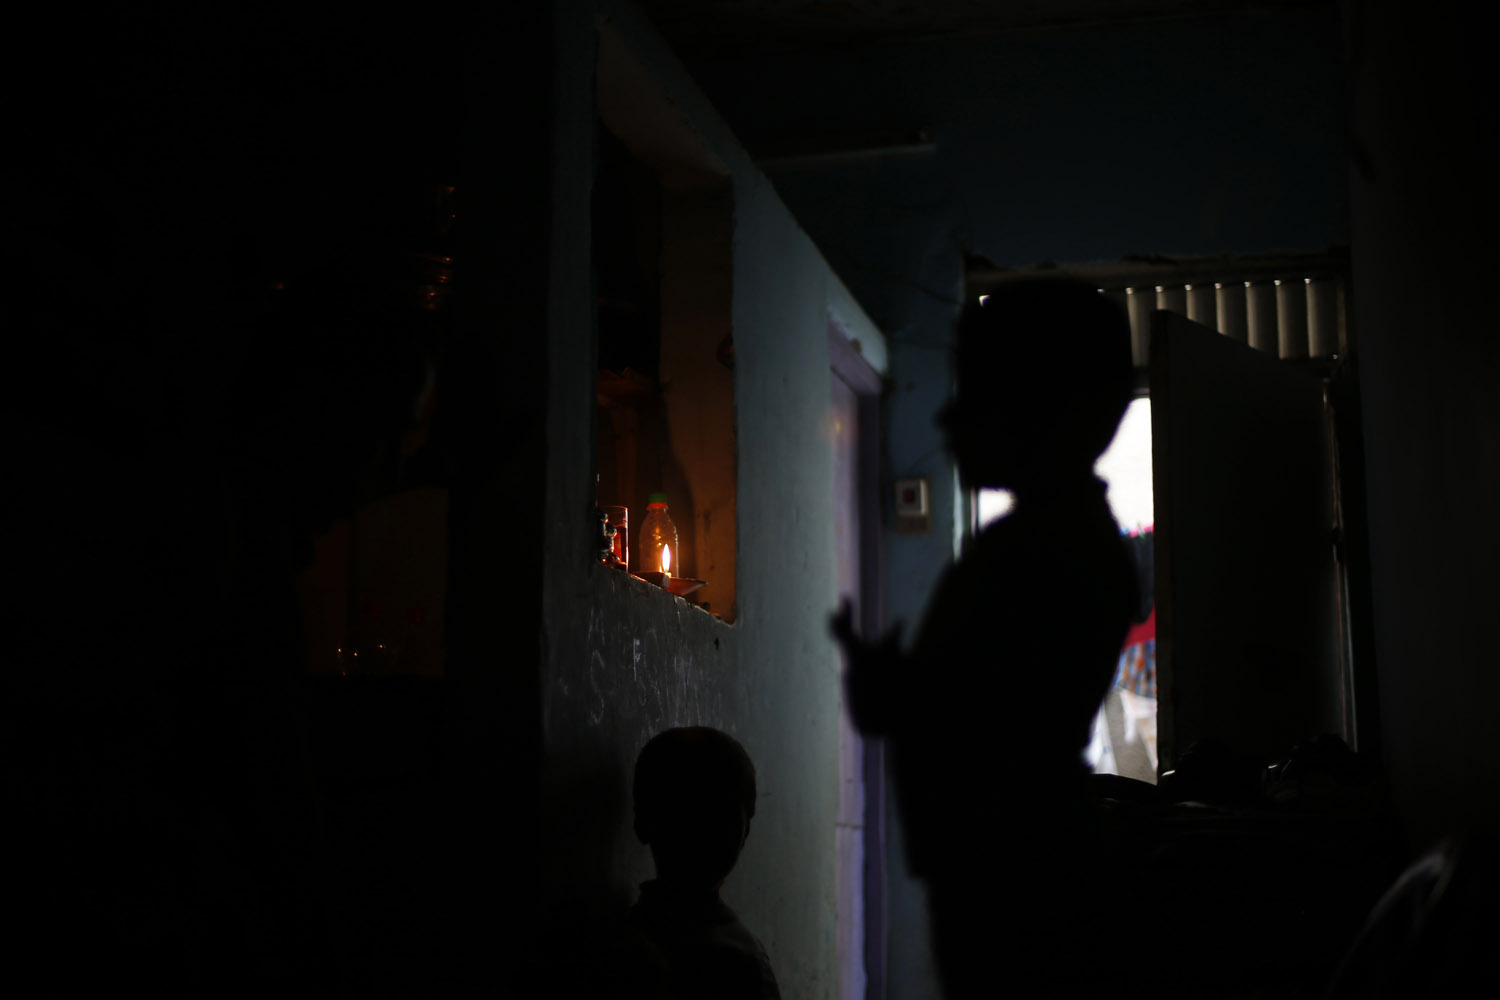 Palestinian children are seen inside their family's house during a power cut in Jabalya refugee camp